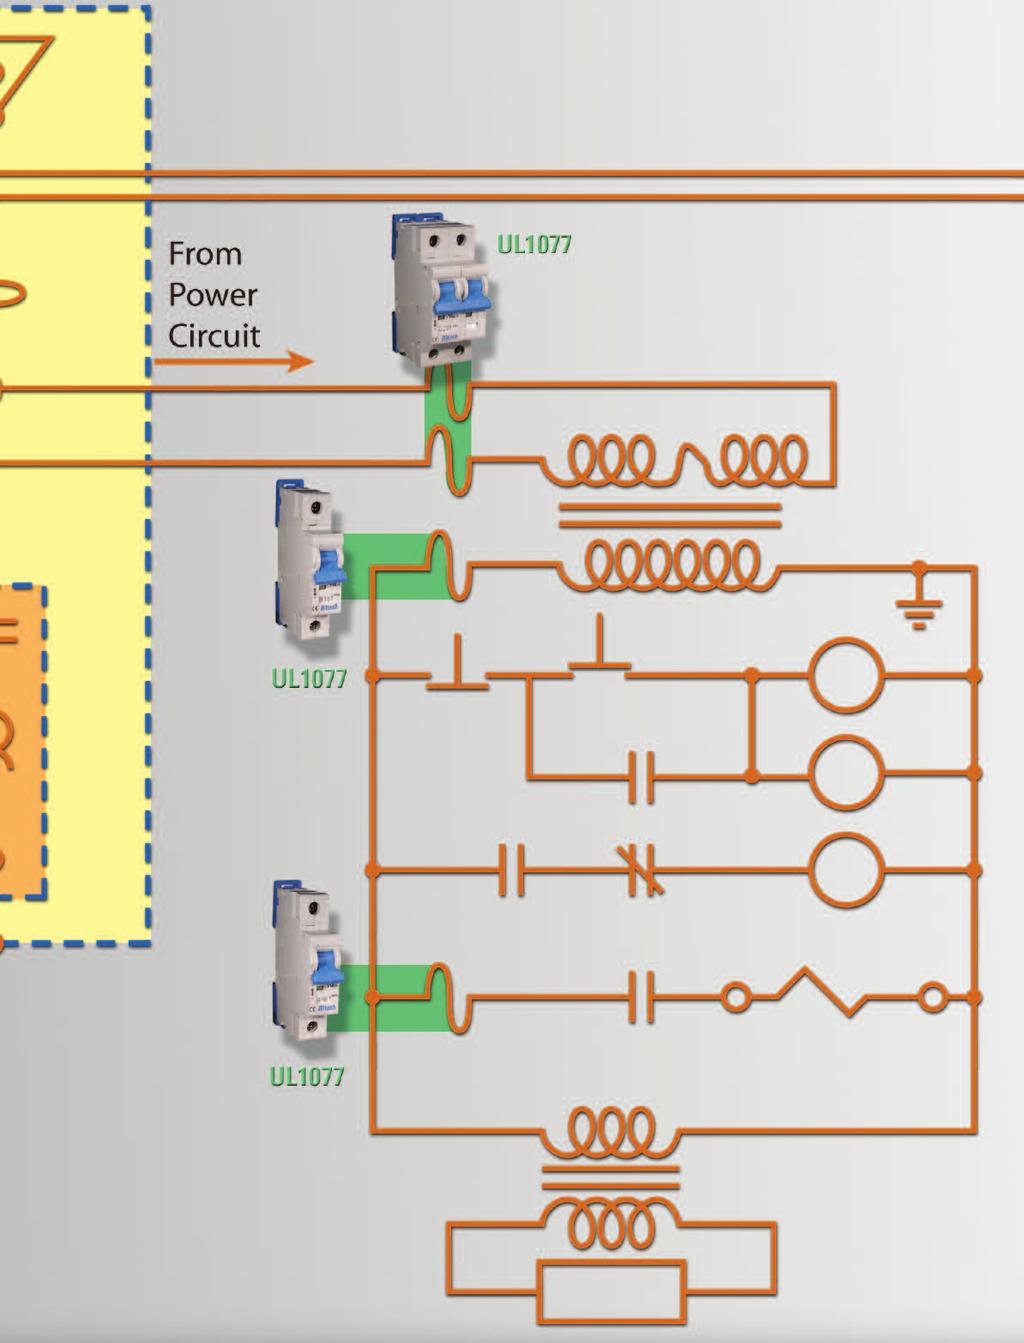 Altech UL077 Typical UL077 Application Control Circuit of a UL508A Panel Disclaimer: This is an example